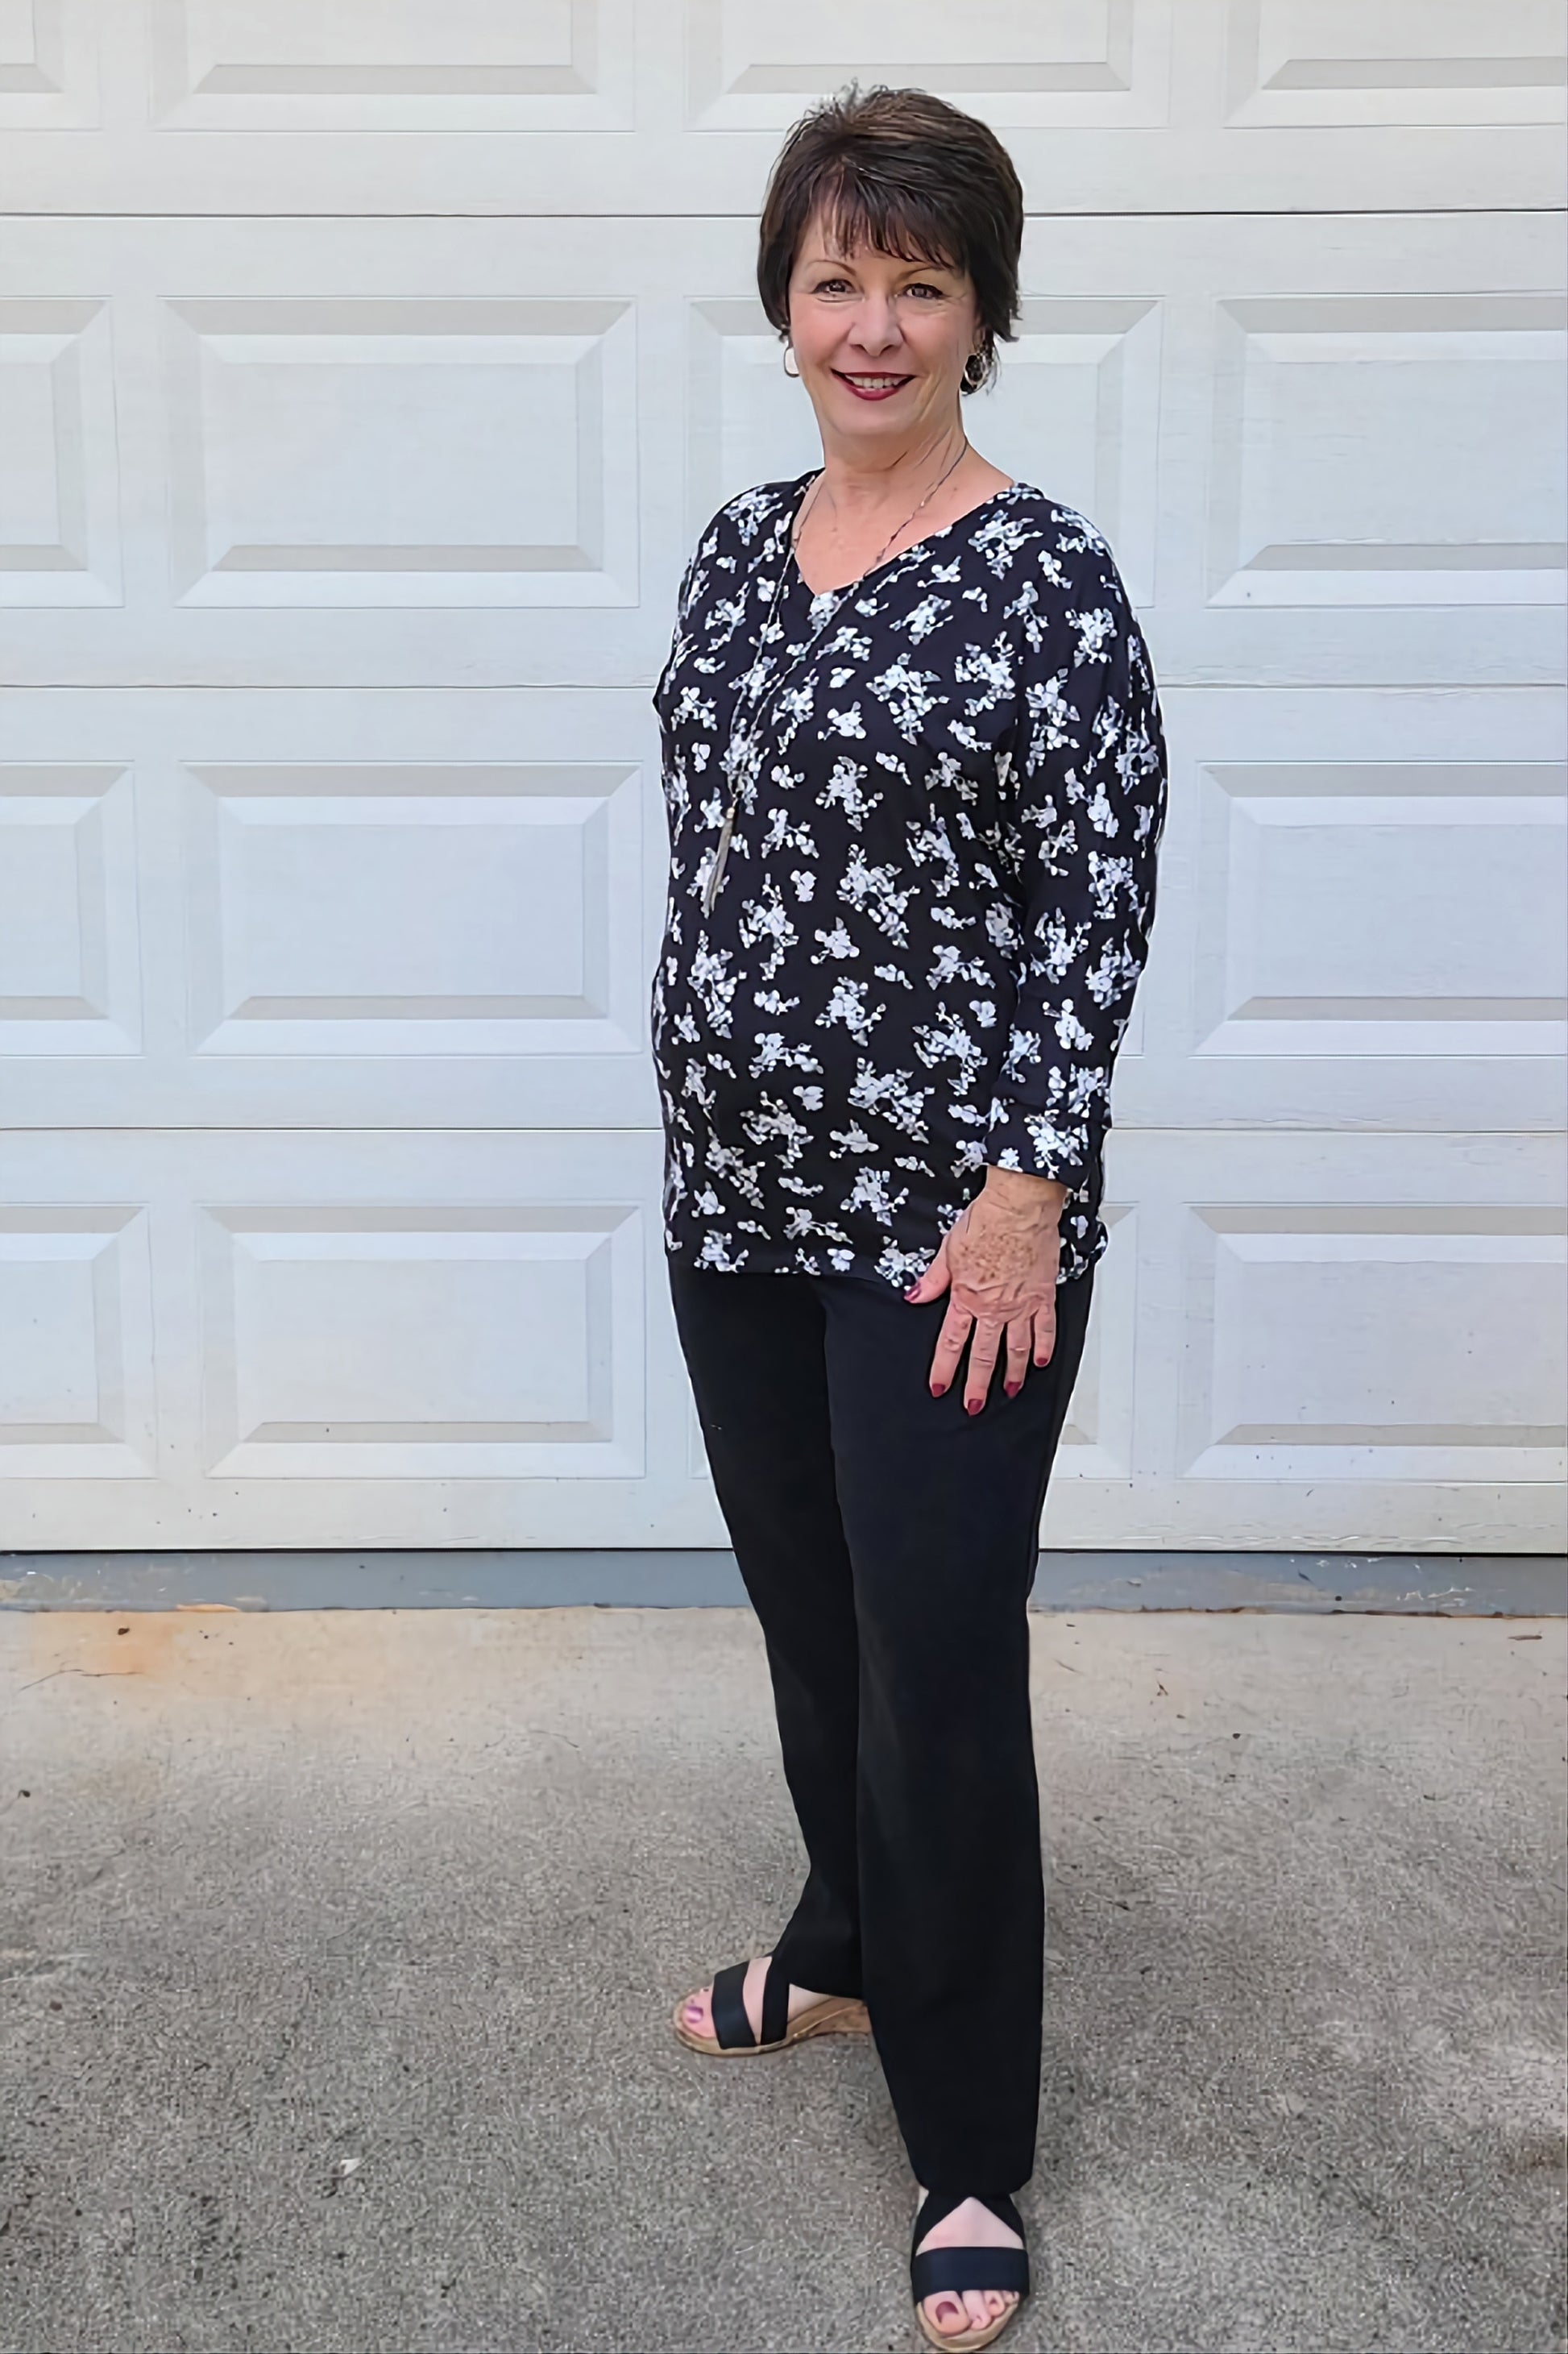 This adorable three-quarter sleeve dolman style top is so soft and cute! A classic v-neck and a flattering style completes a romantic look.